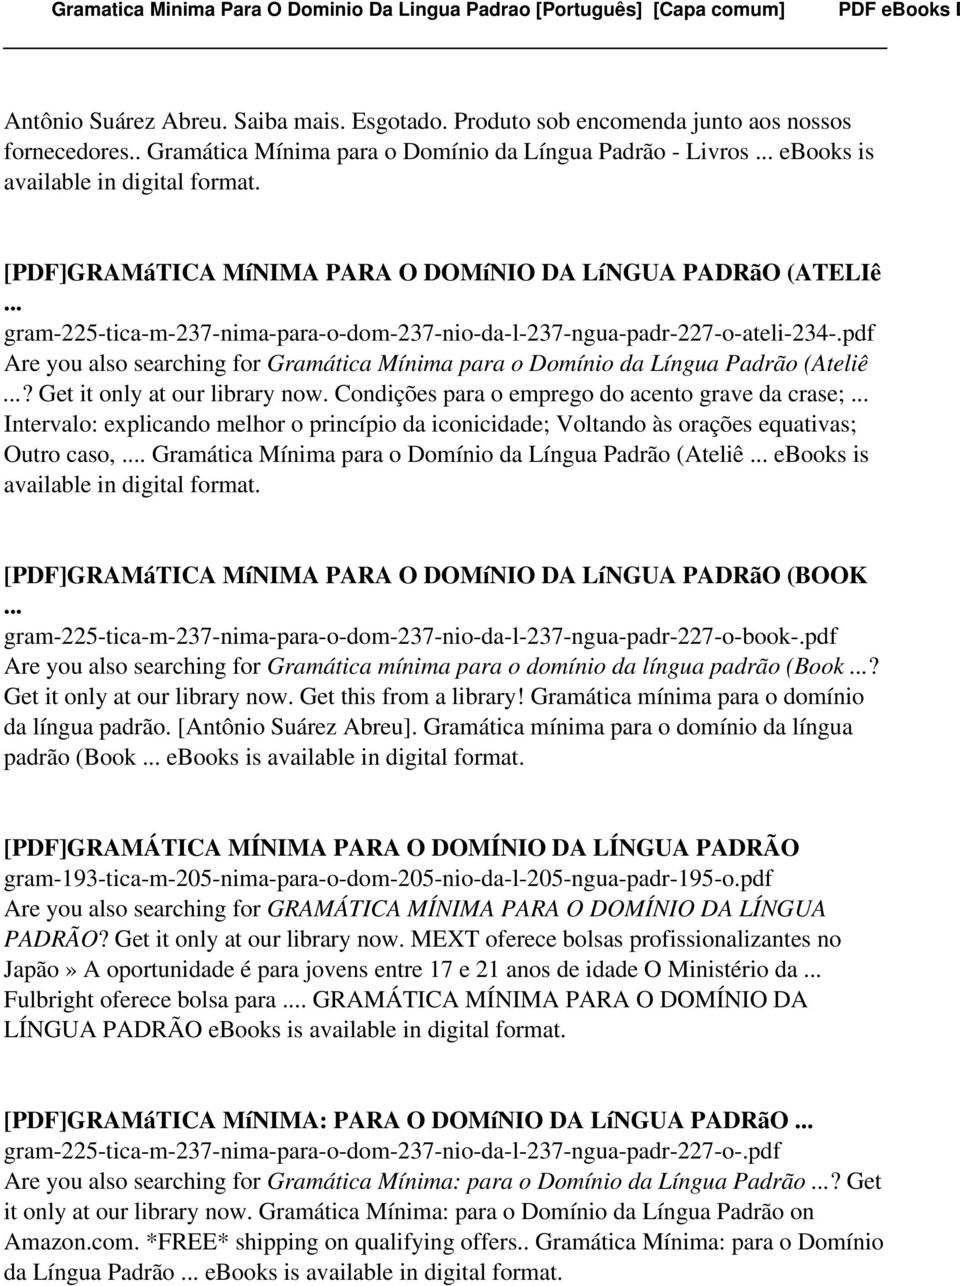 gram-225-tica-m-237-nima-para-o-dom-237-nio-da-l-237-ngua-padr-227-o-ateli-234-.pdf Are you also searching for Gramática Mínima para o Domínio da Língua Padrão (Ateliê? Get it only at our library now.